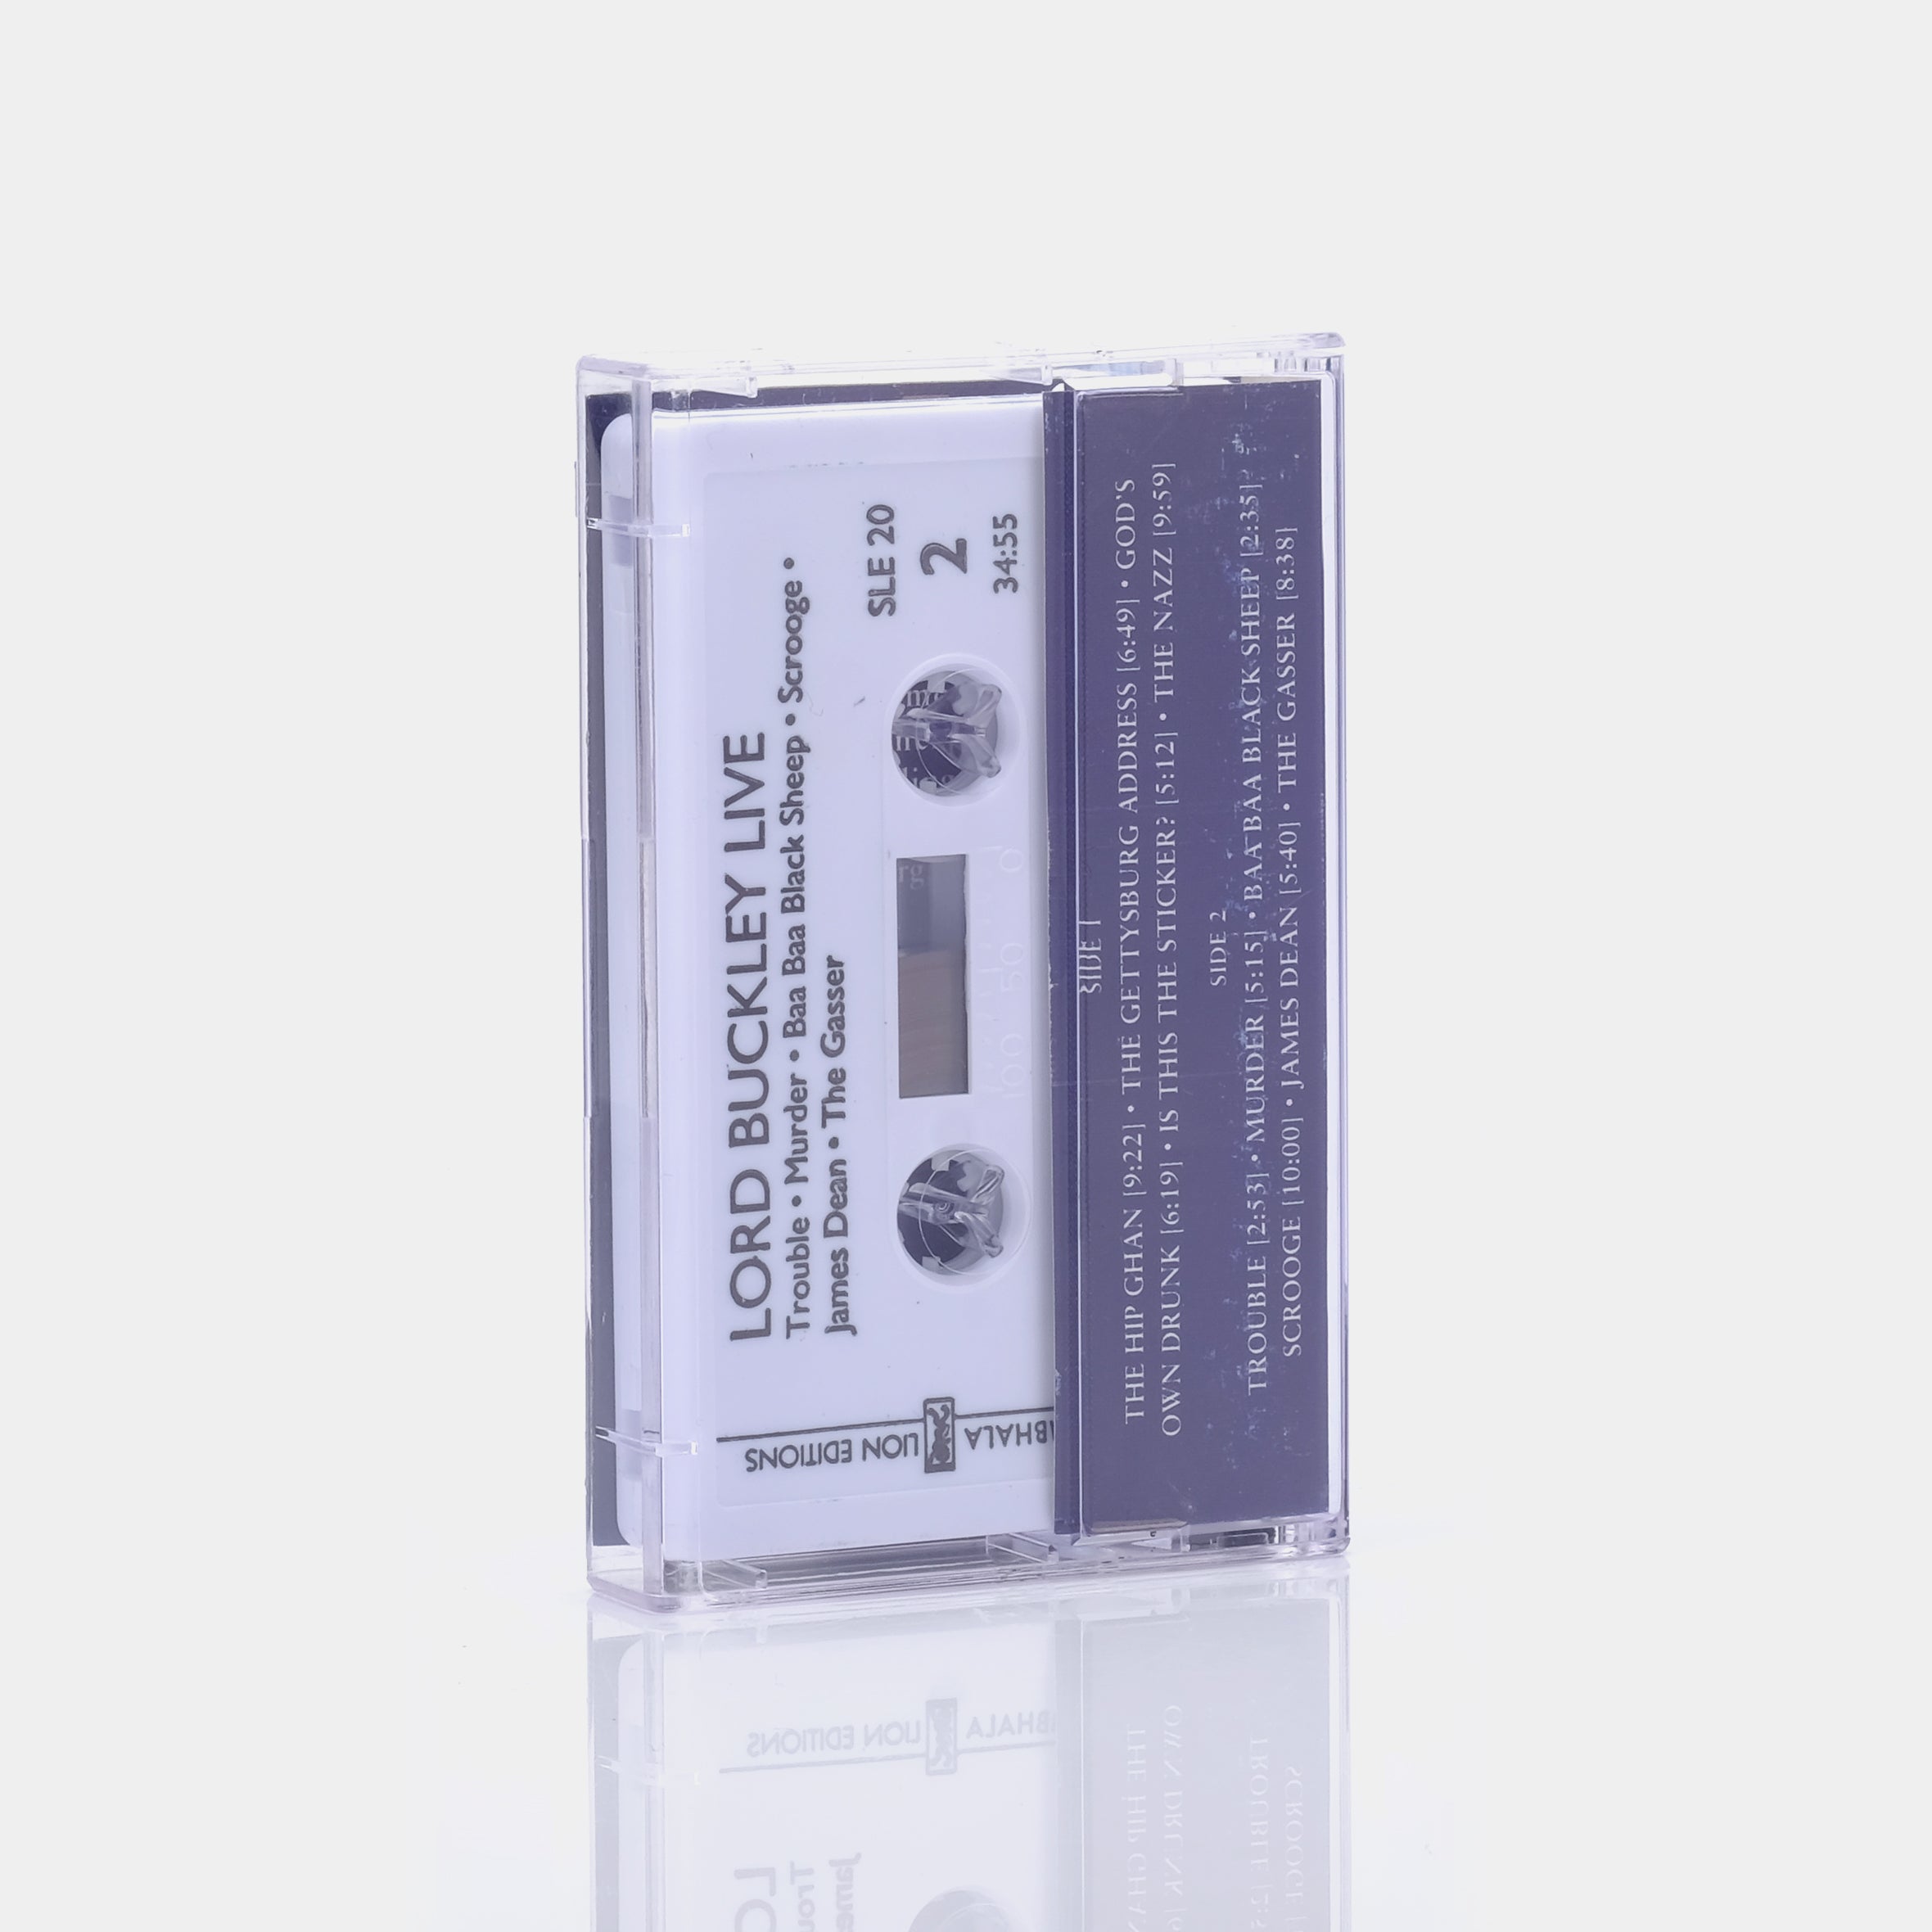 Lord Buckley - Live/The Tales Of Lord Buckley Cassette Tape